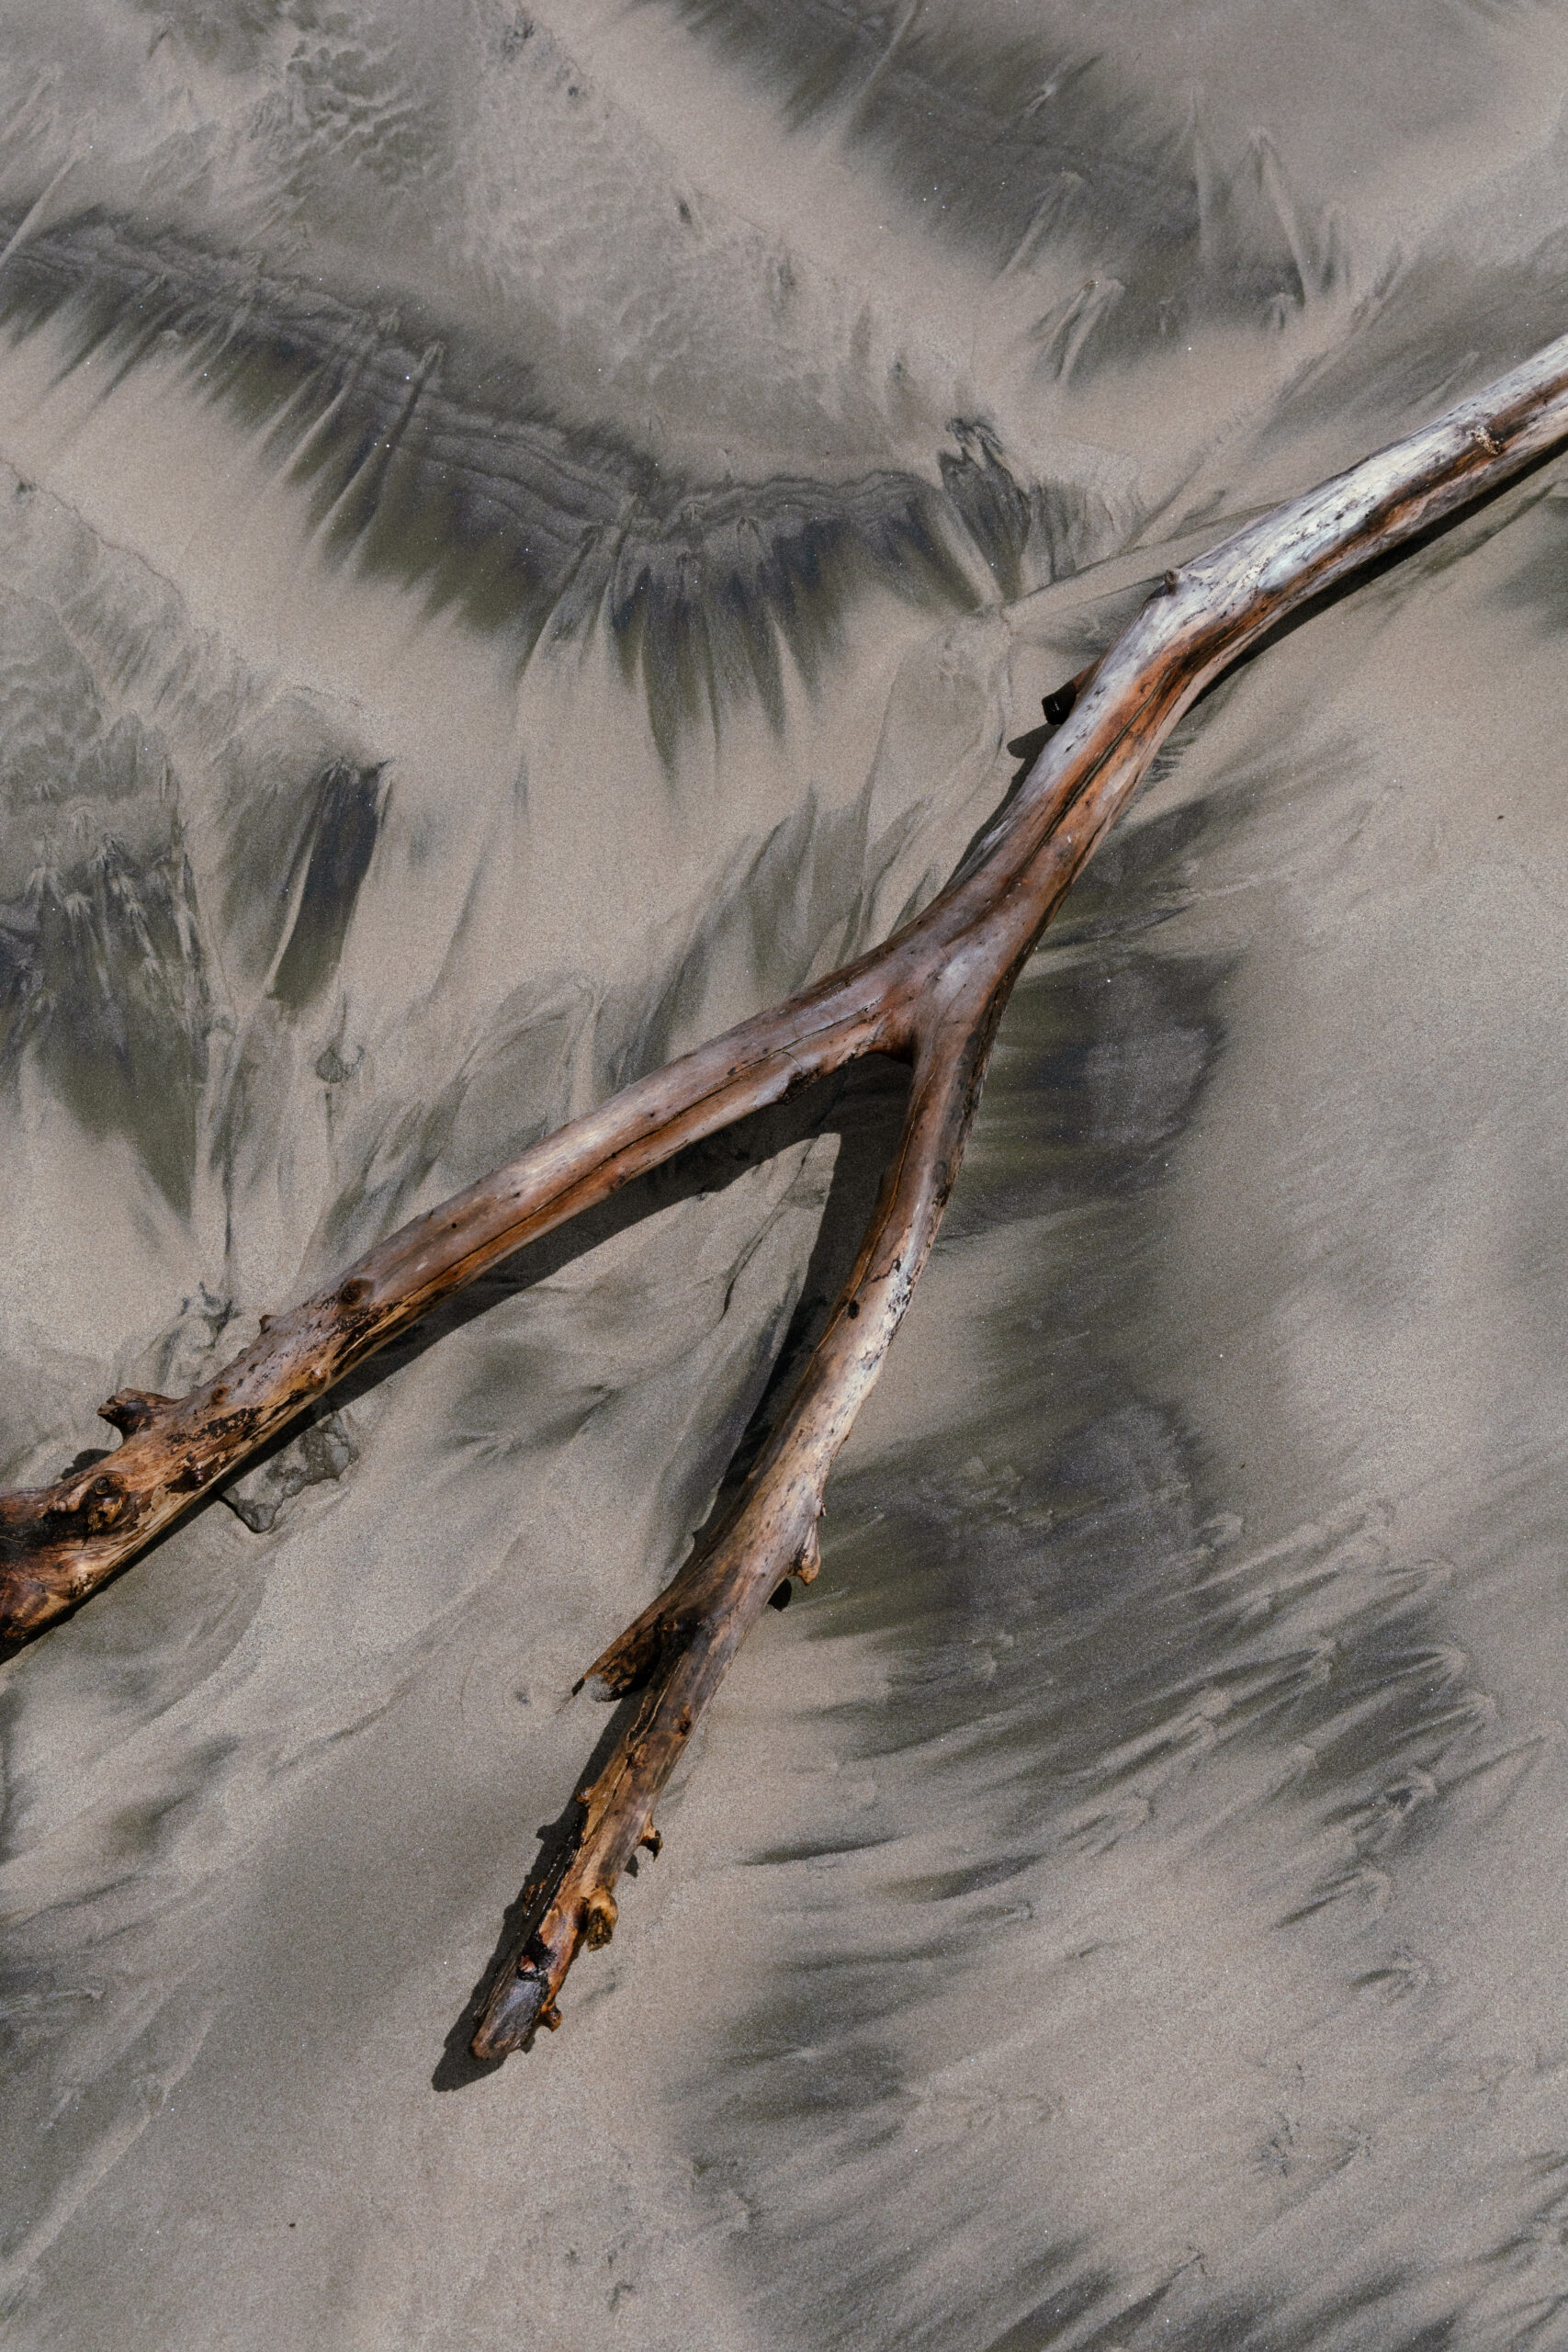 Costa Rican beach photography series. Close-up photography of a stick on sand, on a beach, by Juan Tribaldos.